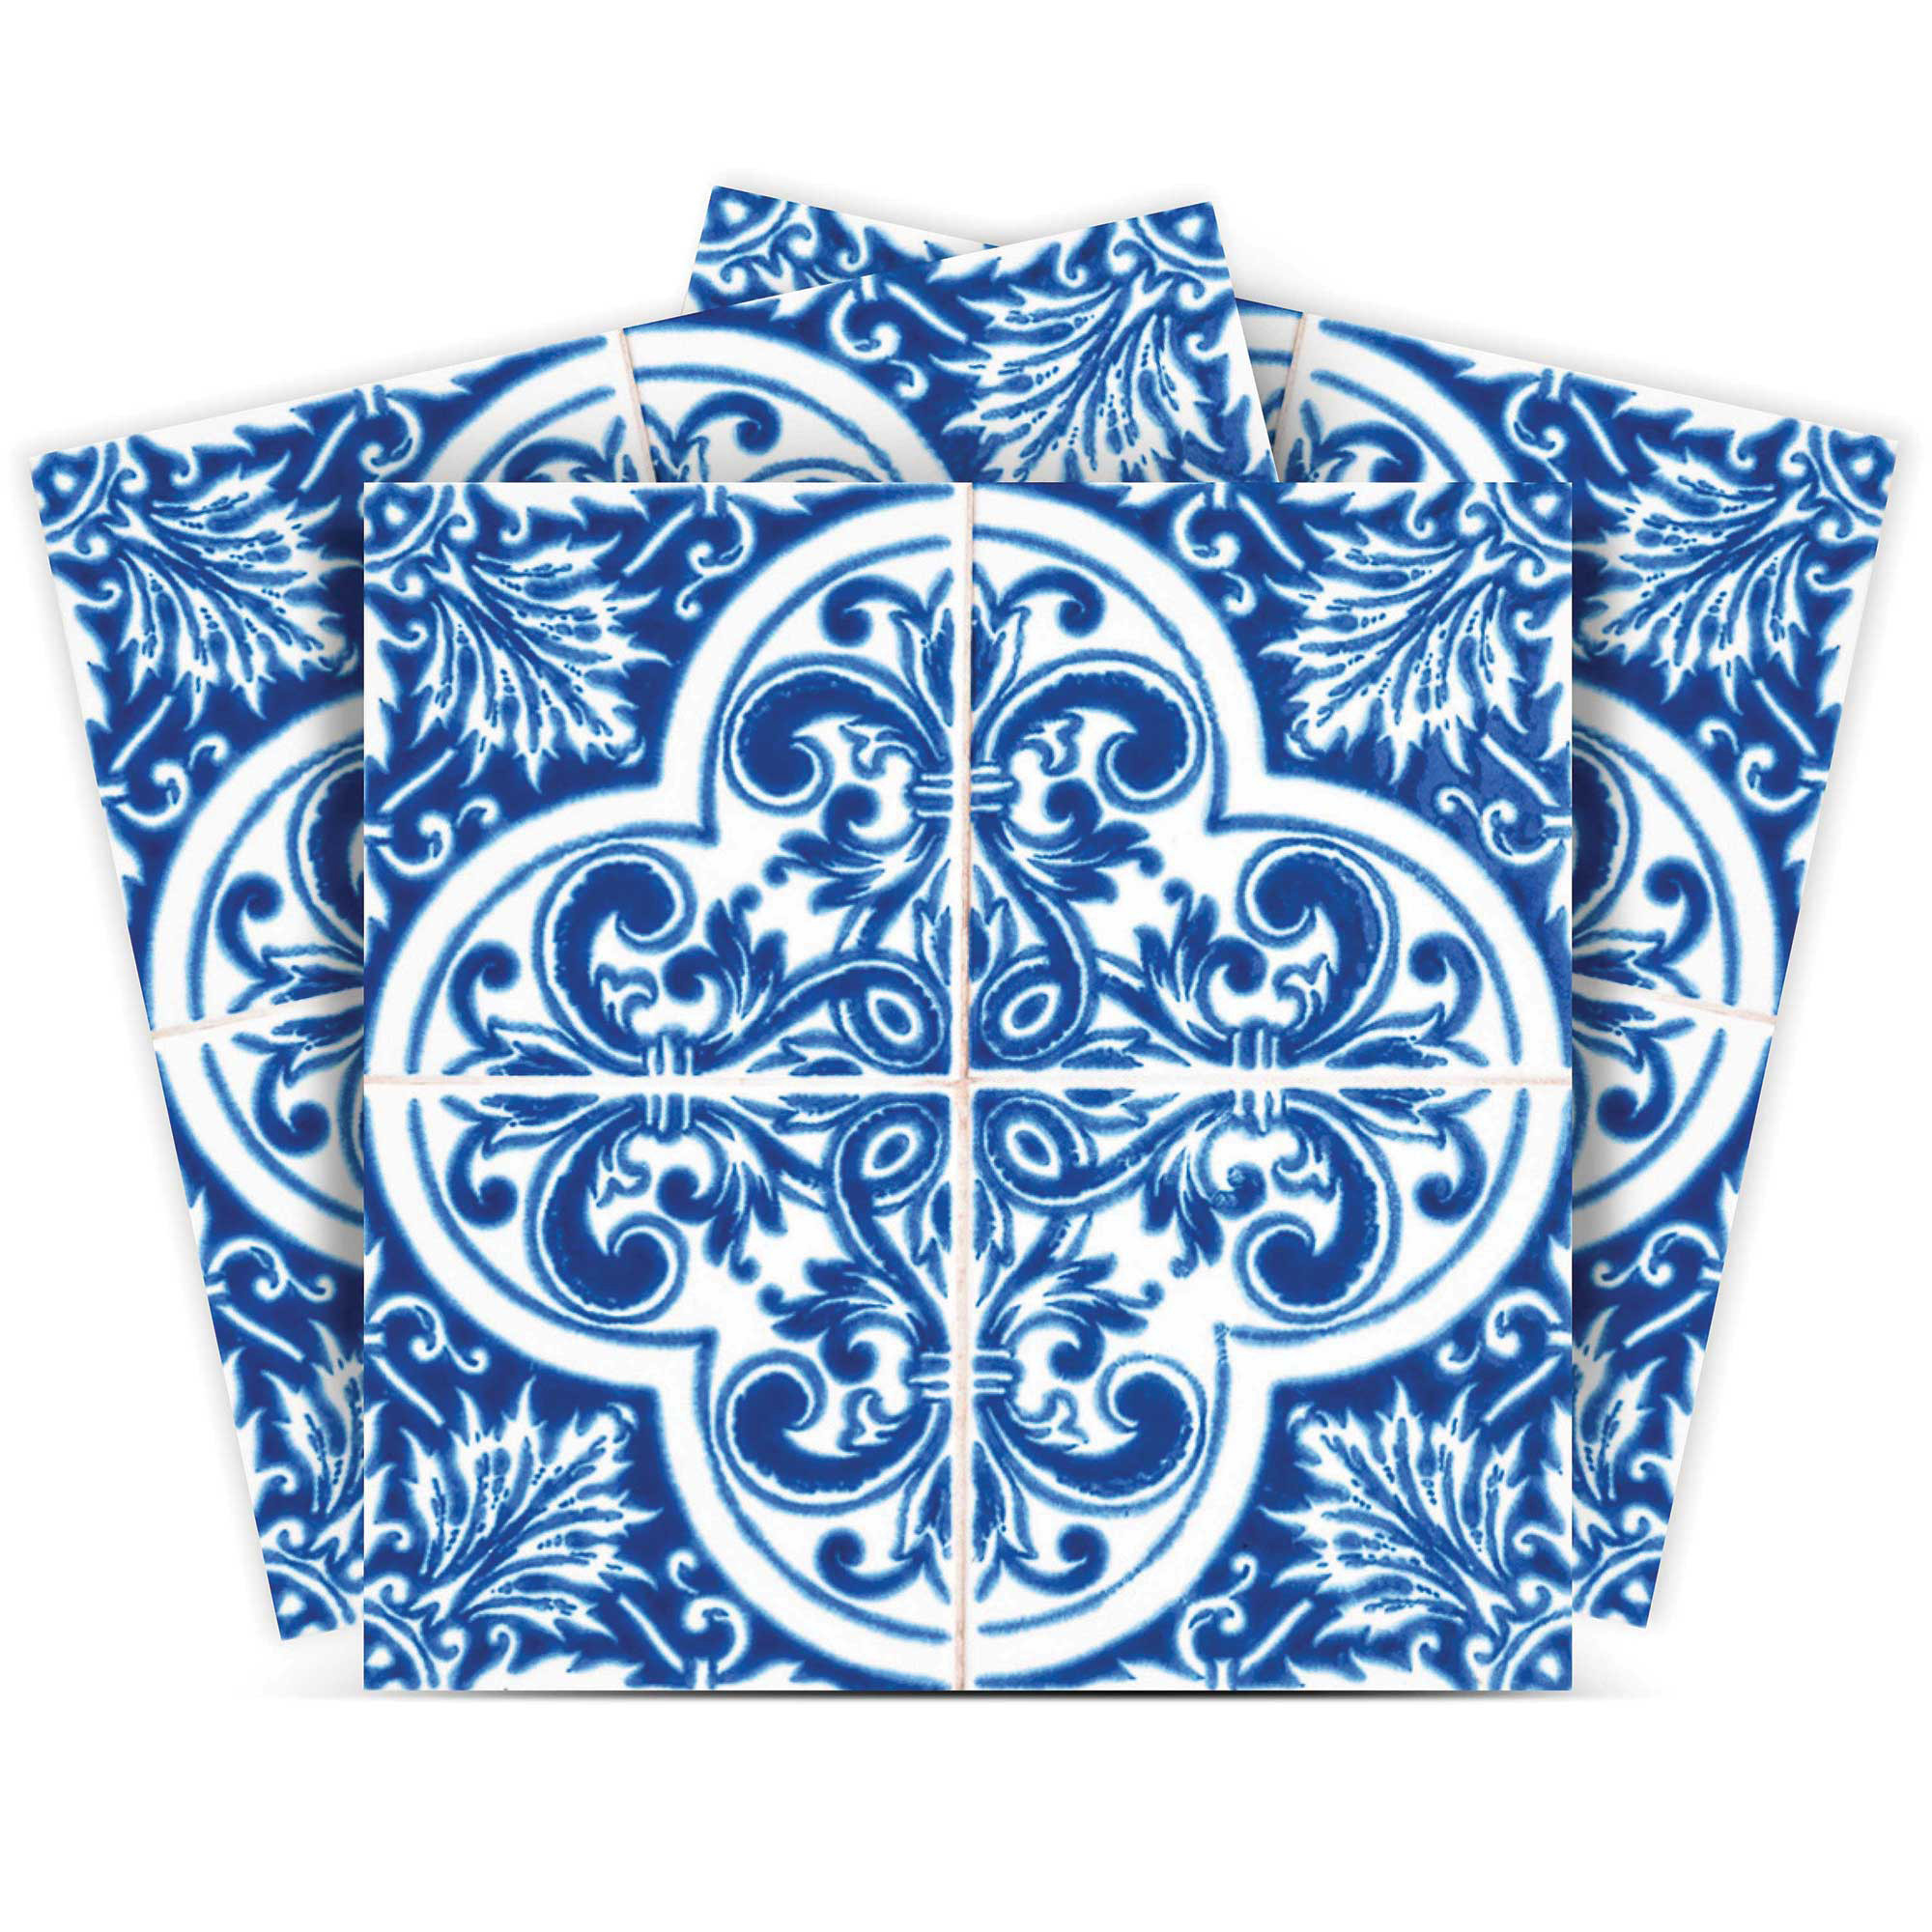 8" X 8" Blue and White Cross Peel And Stick Tiles-400119-1